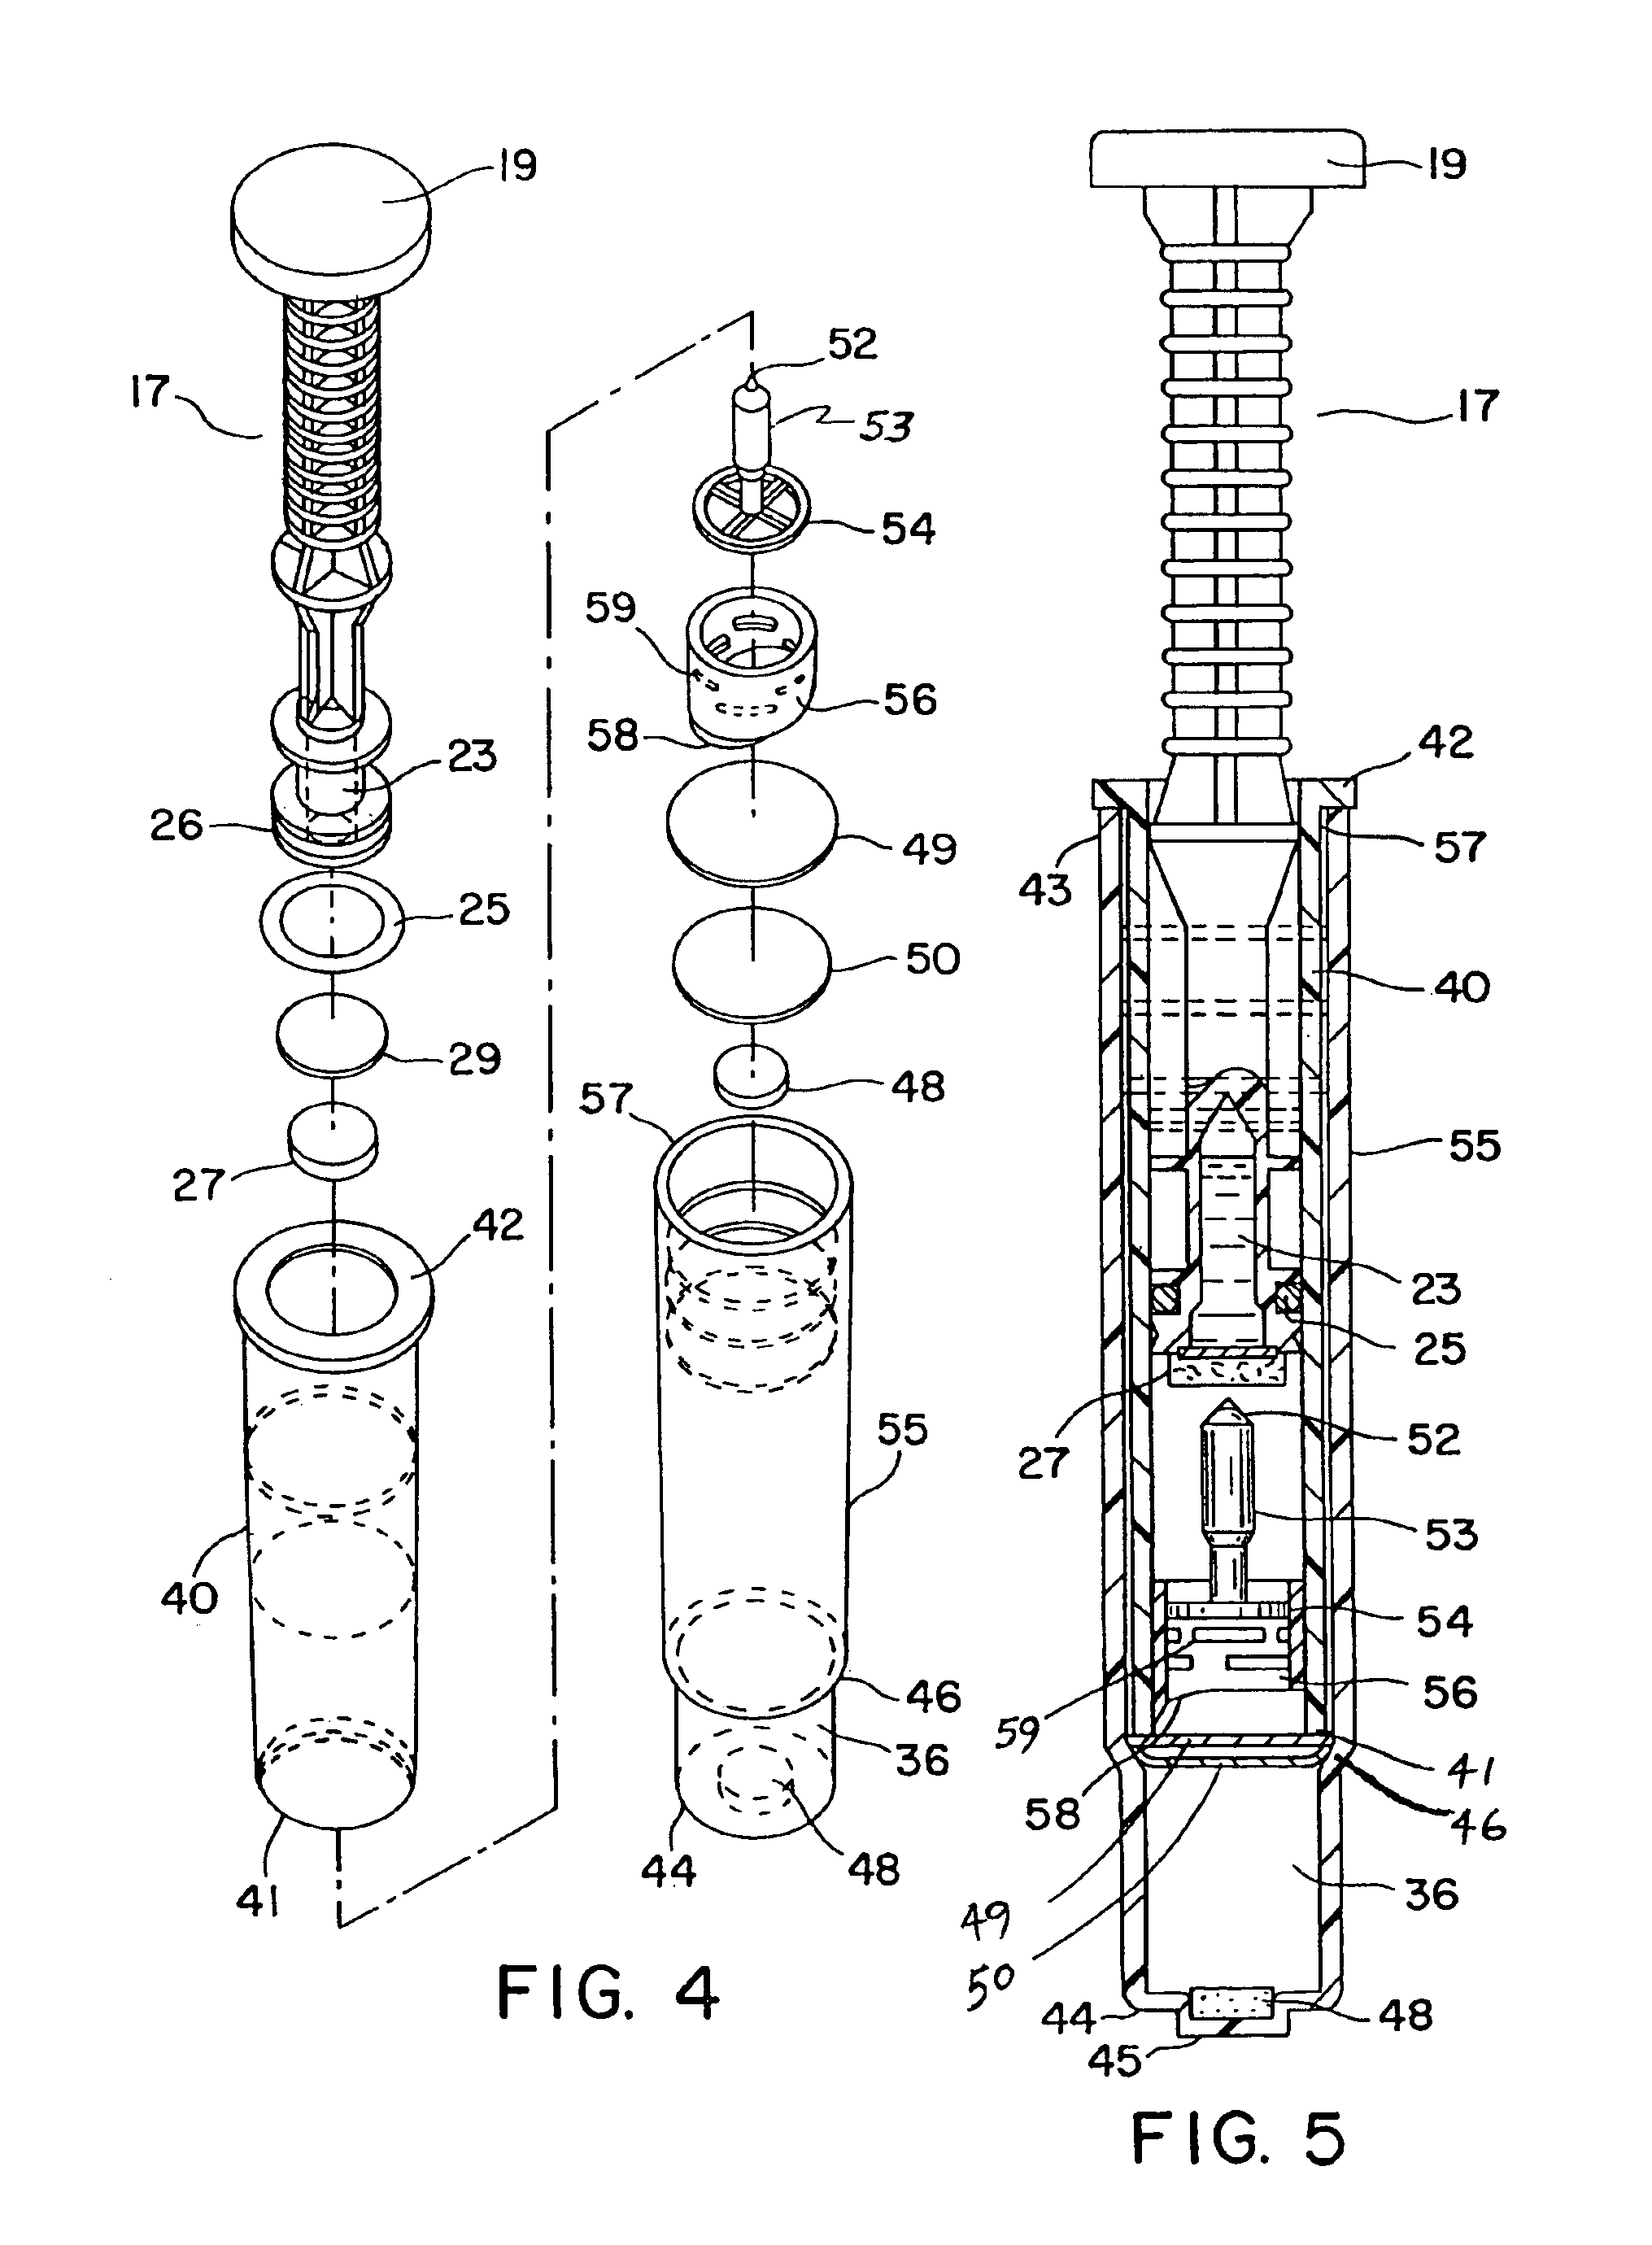 Apparatus and methods for chemiluminescent assays